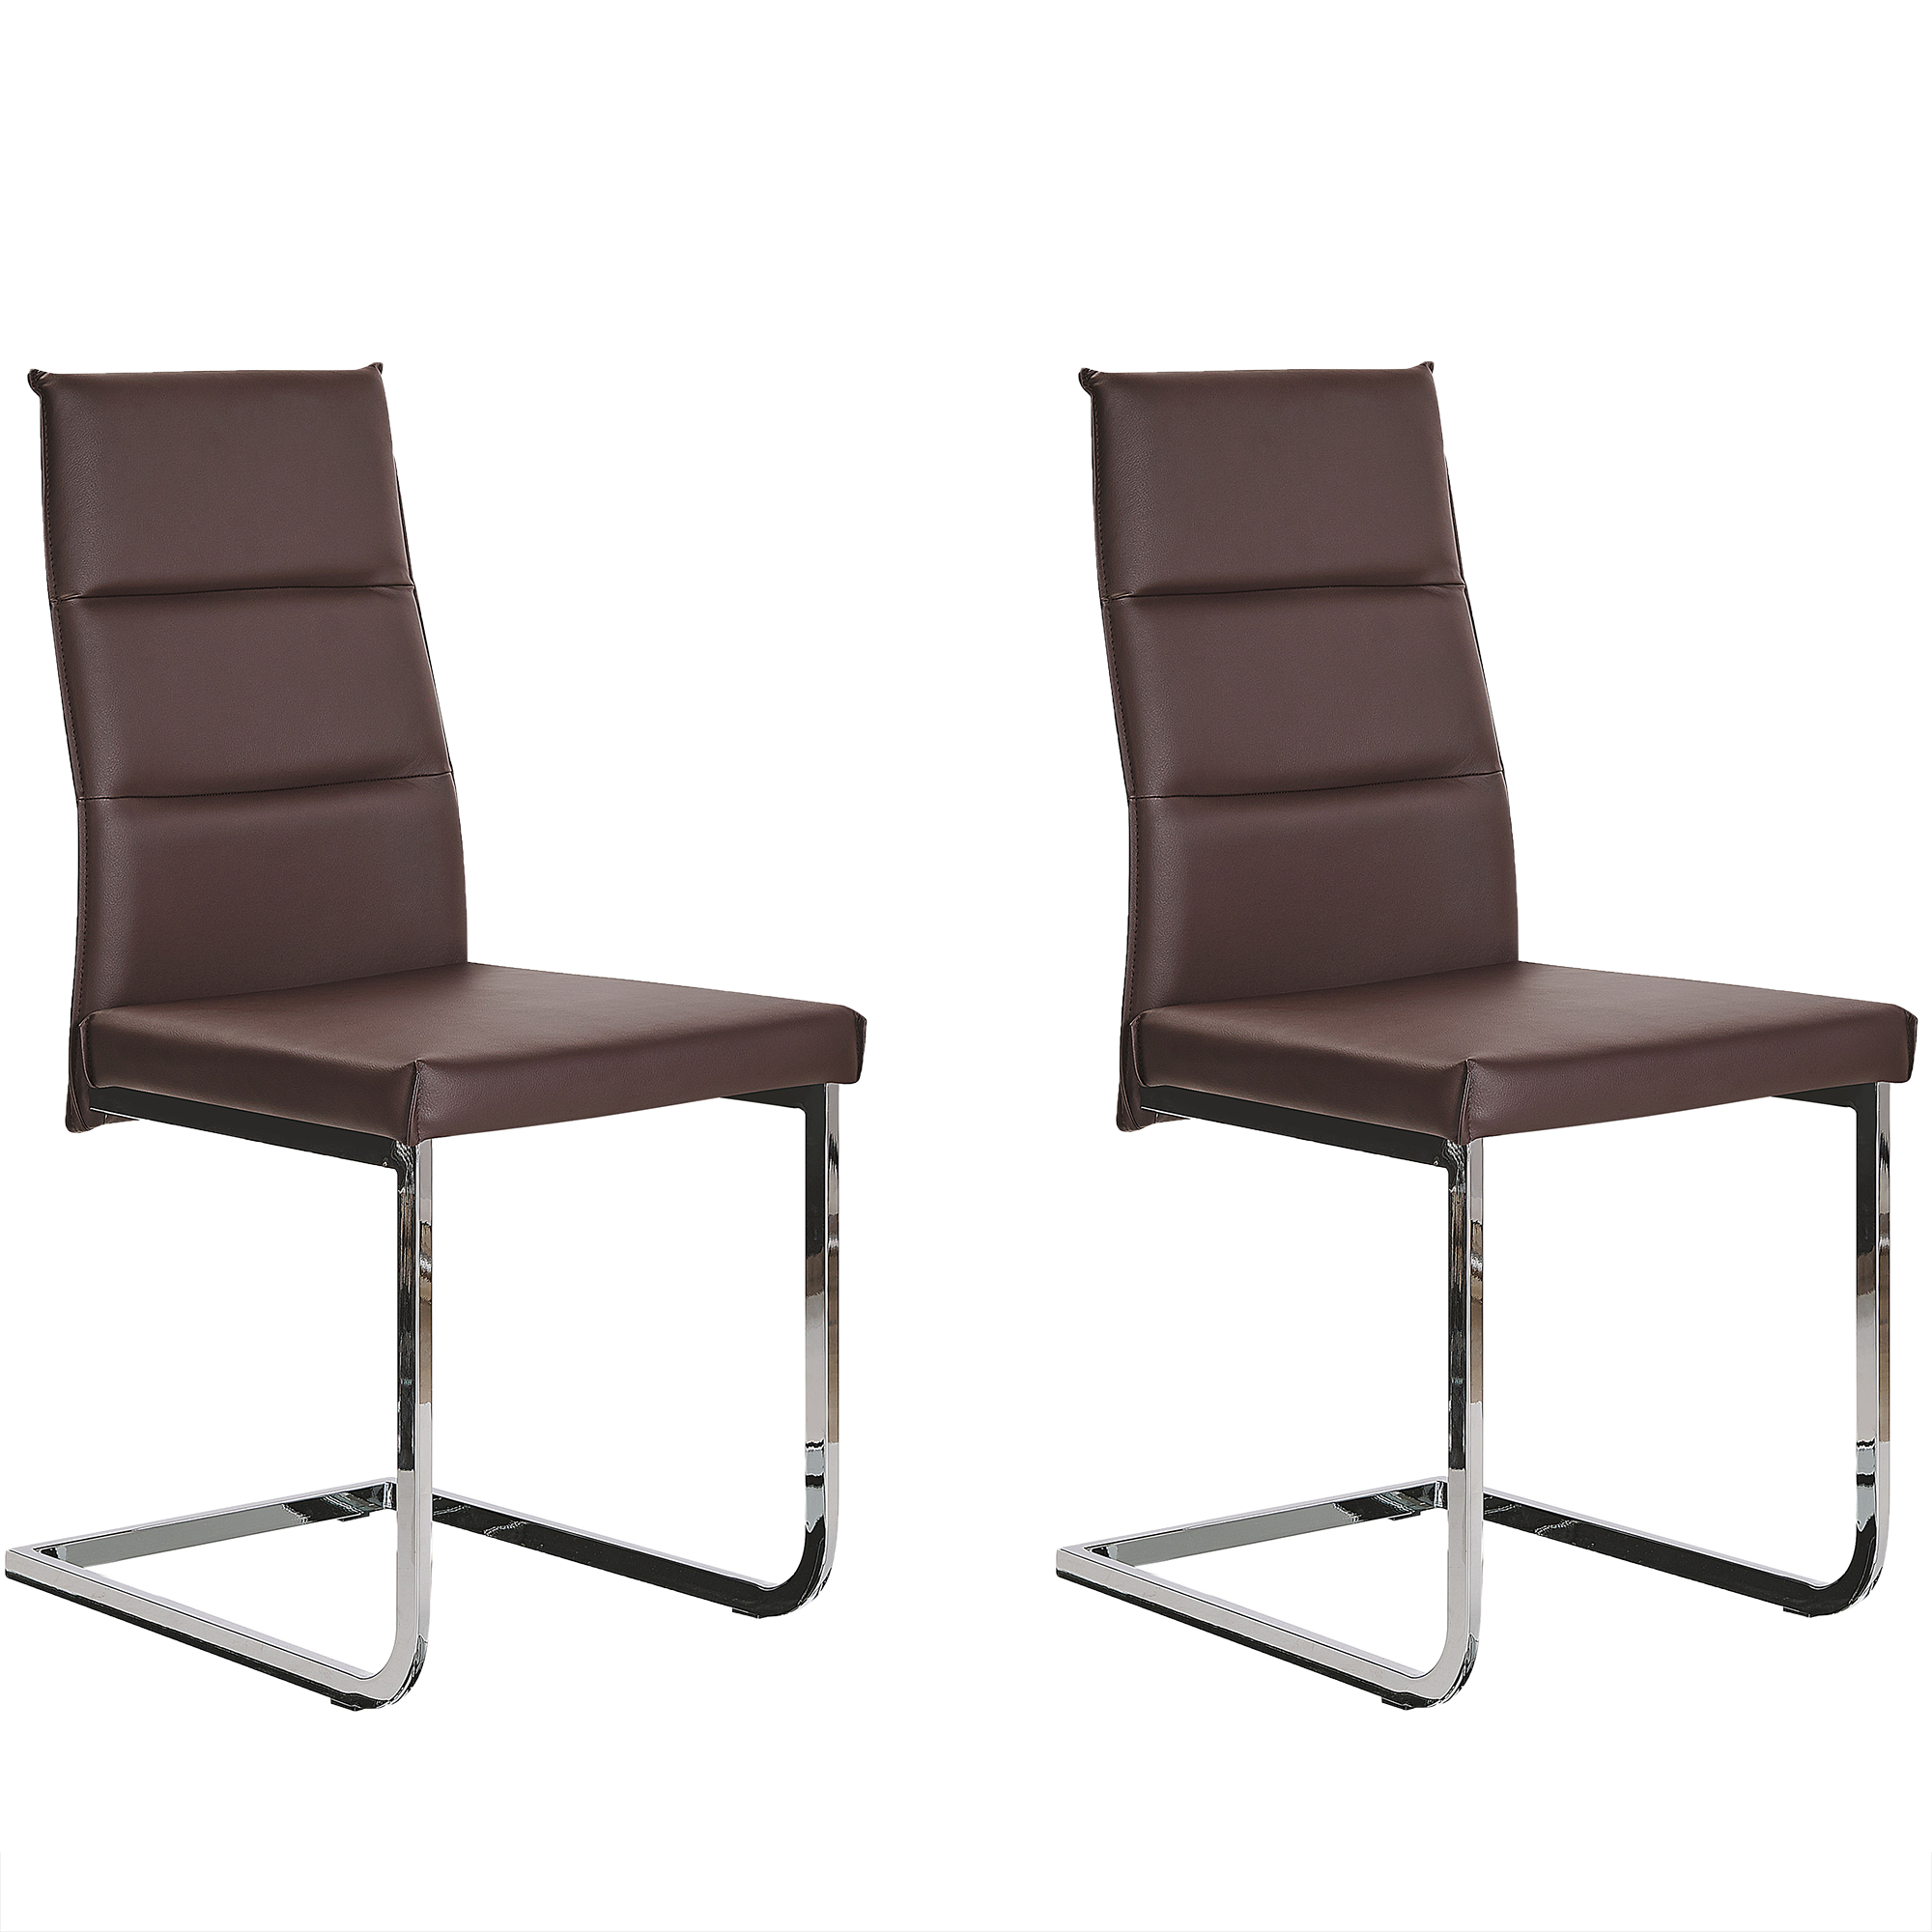 Beliani Set of 2 Dining Chairs Dark Brown Faux Leather Upholstered Cantilever Silver Legs Armless Modern Design